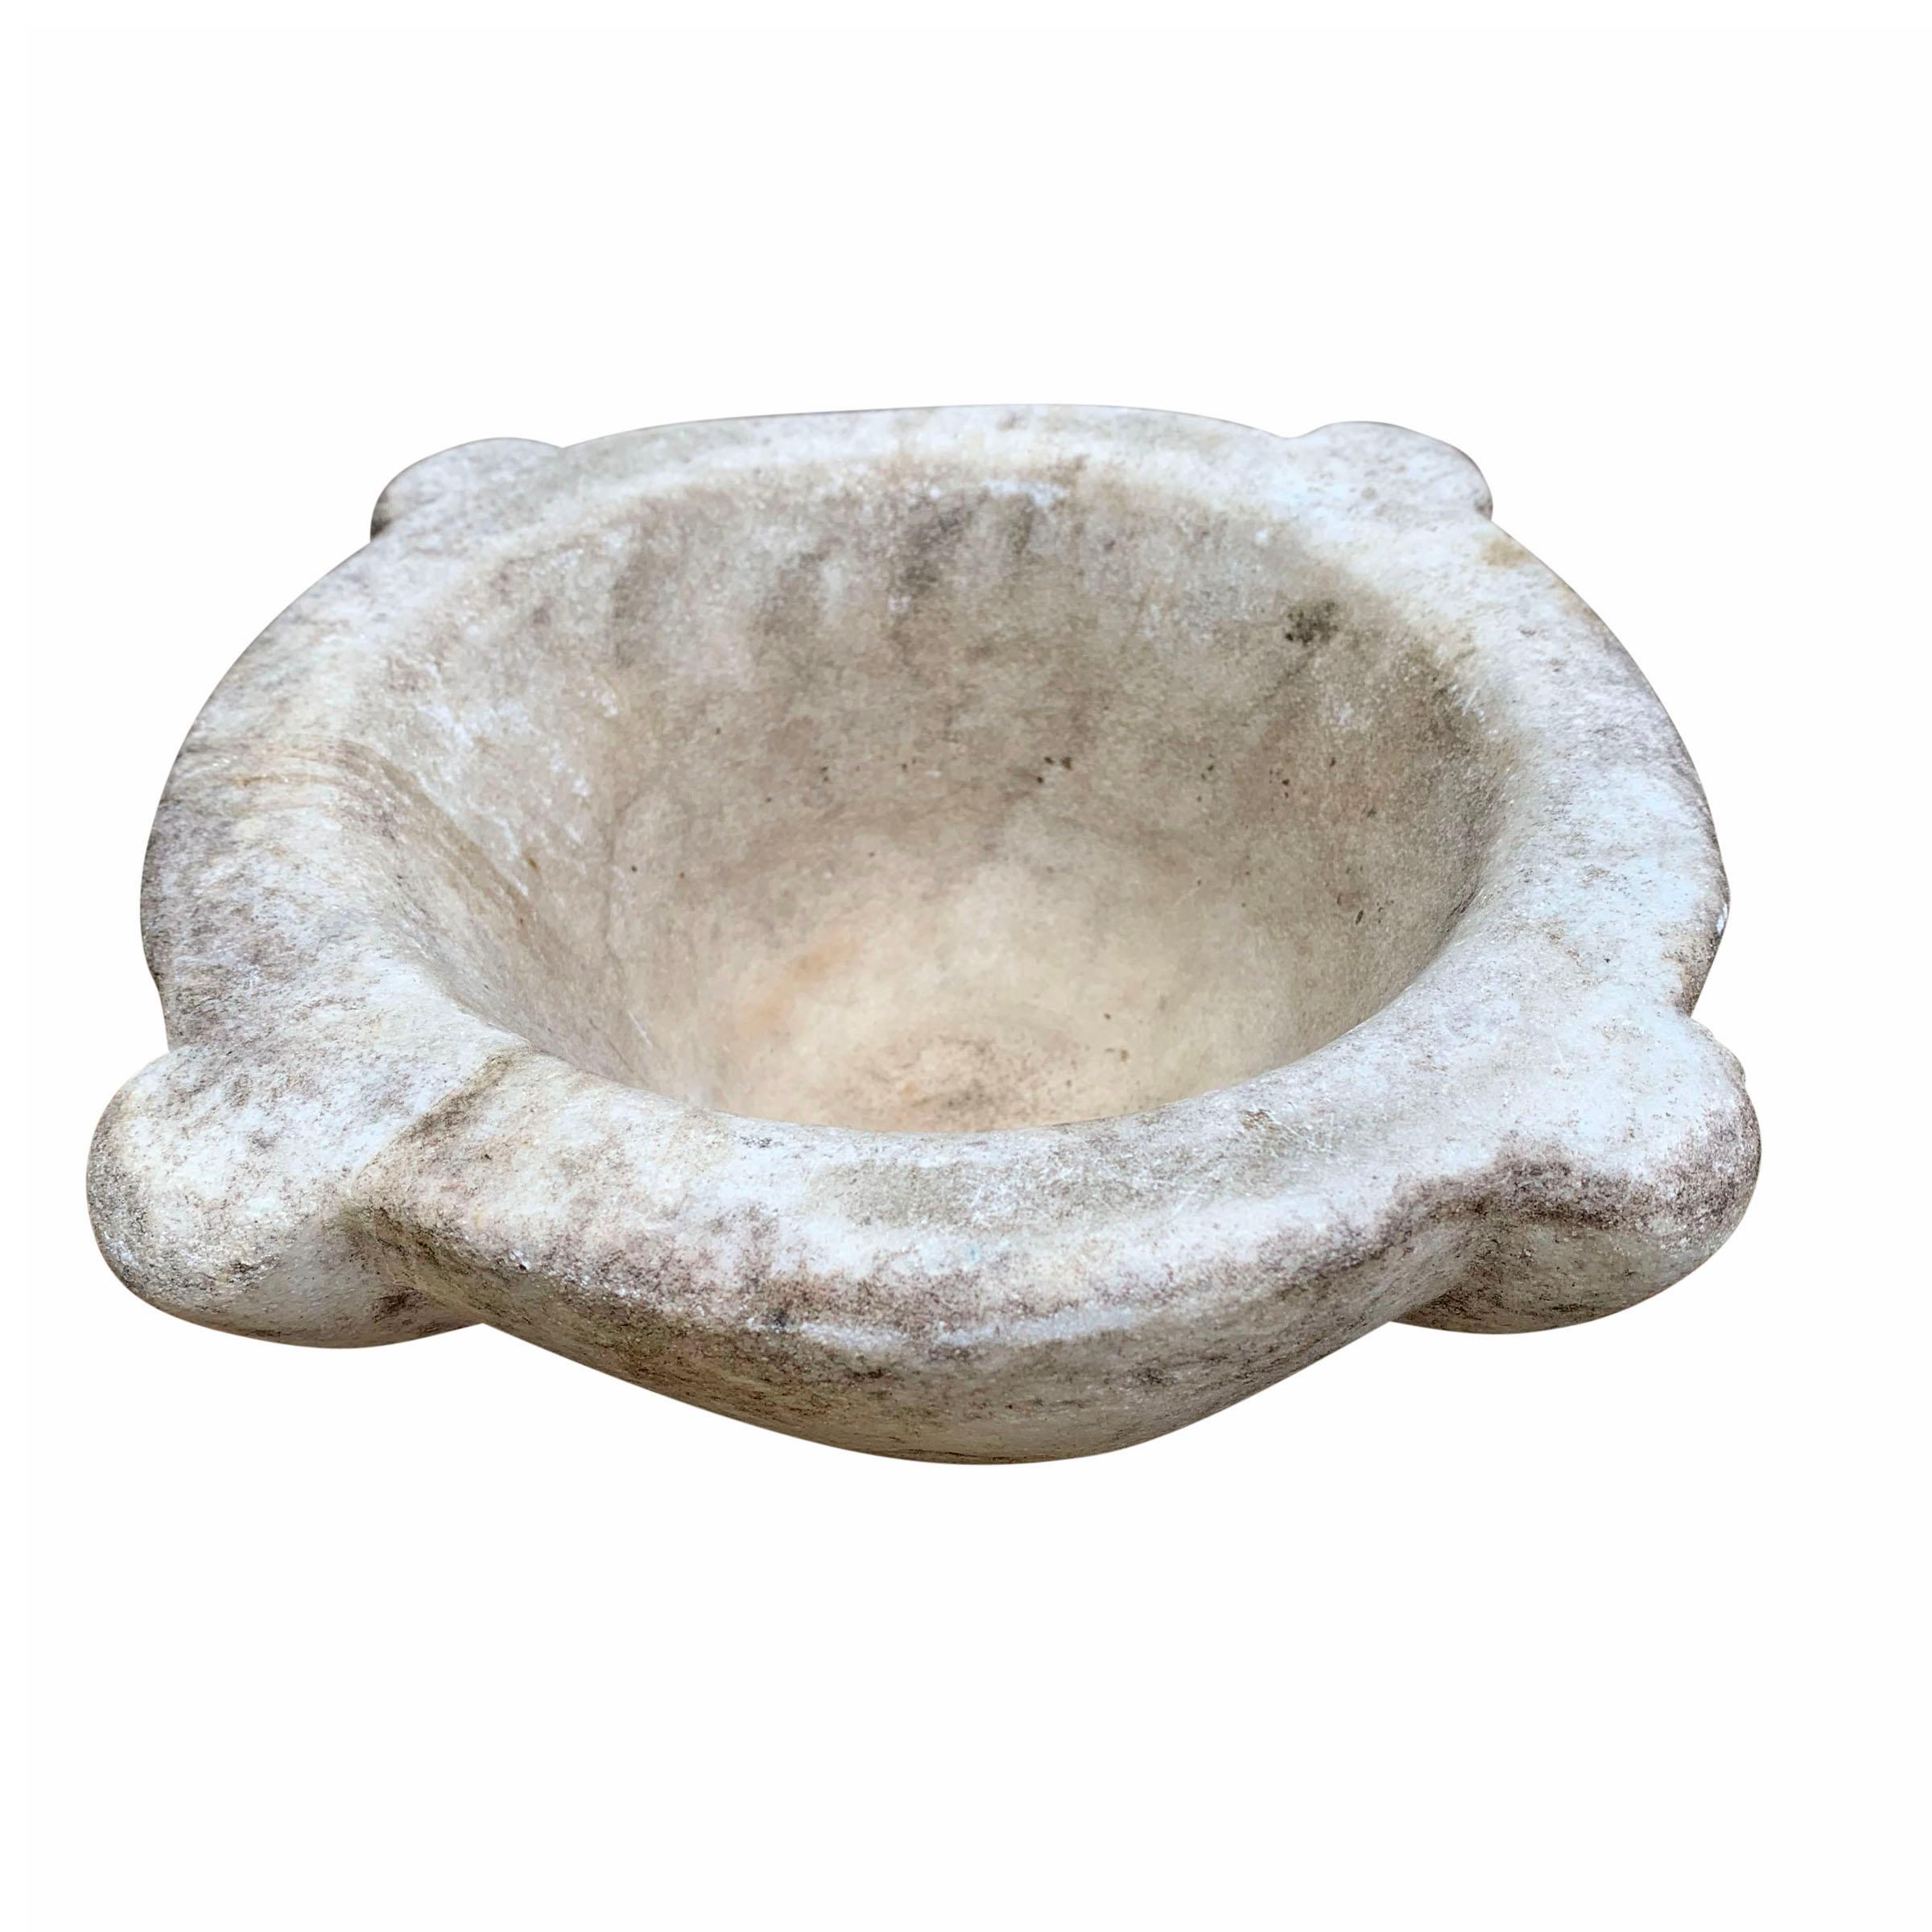 A wonderful 19th century Italian carved marble mortar originally used to make pesto, now perfect for keeping your salt and pepper at arm’s reach, crushing other herbs and spices, or serving chips at your next fête.